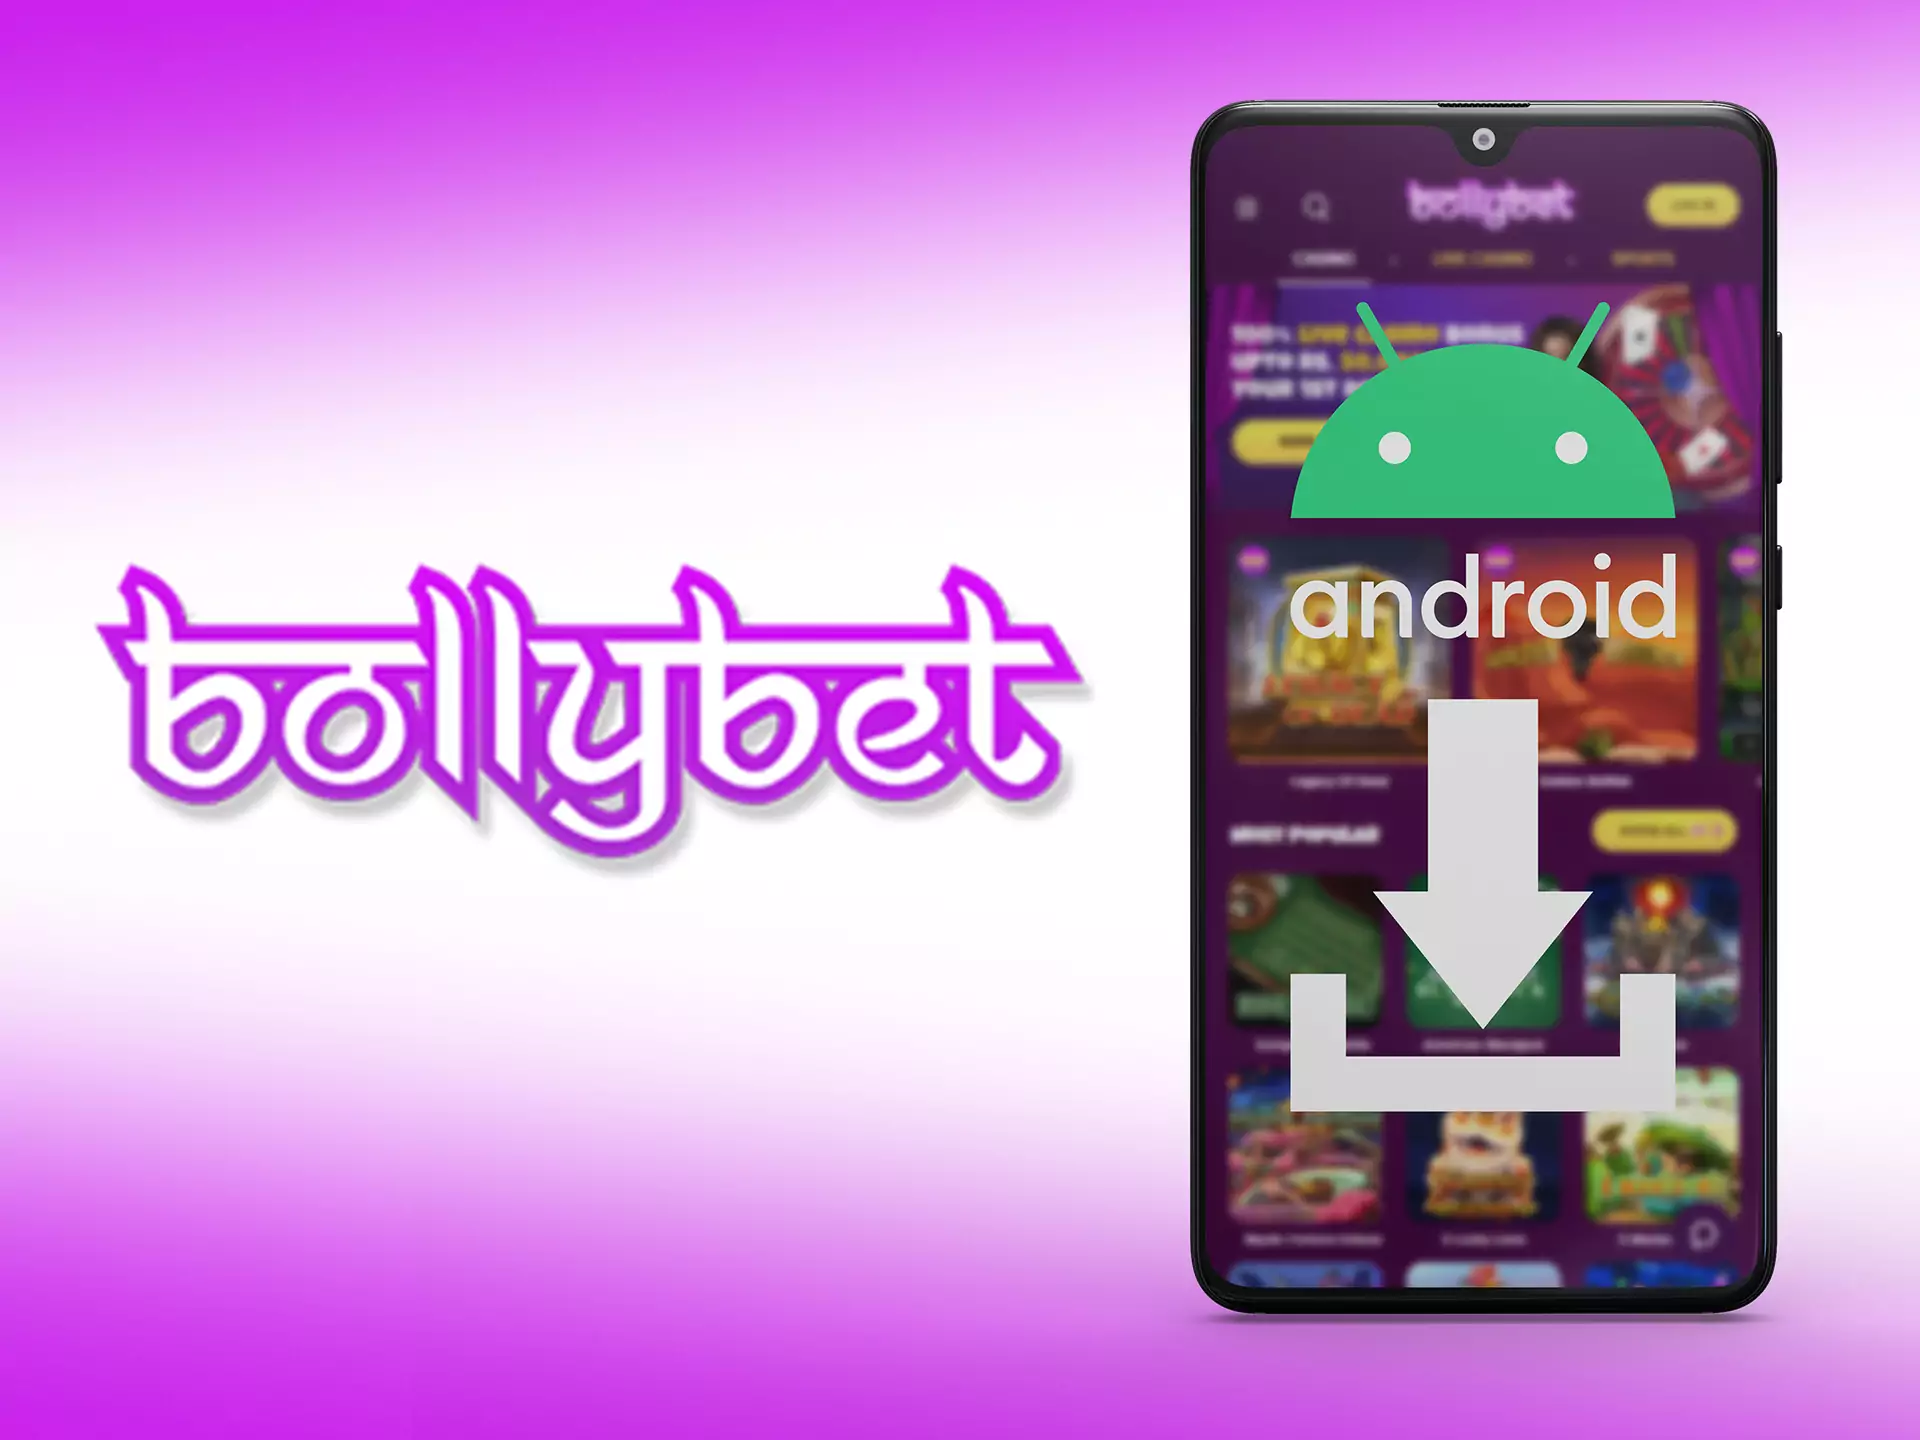 Bollybet application for Android is in the last stage of development.